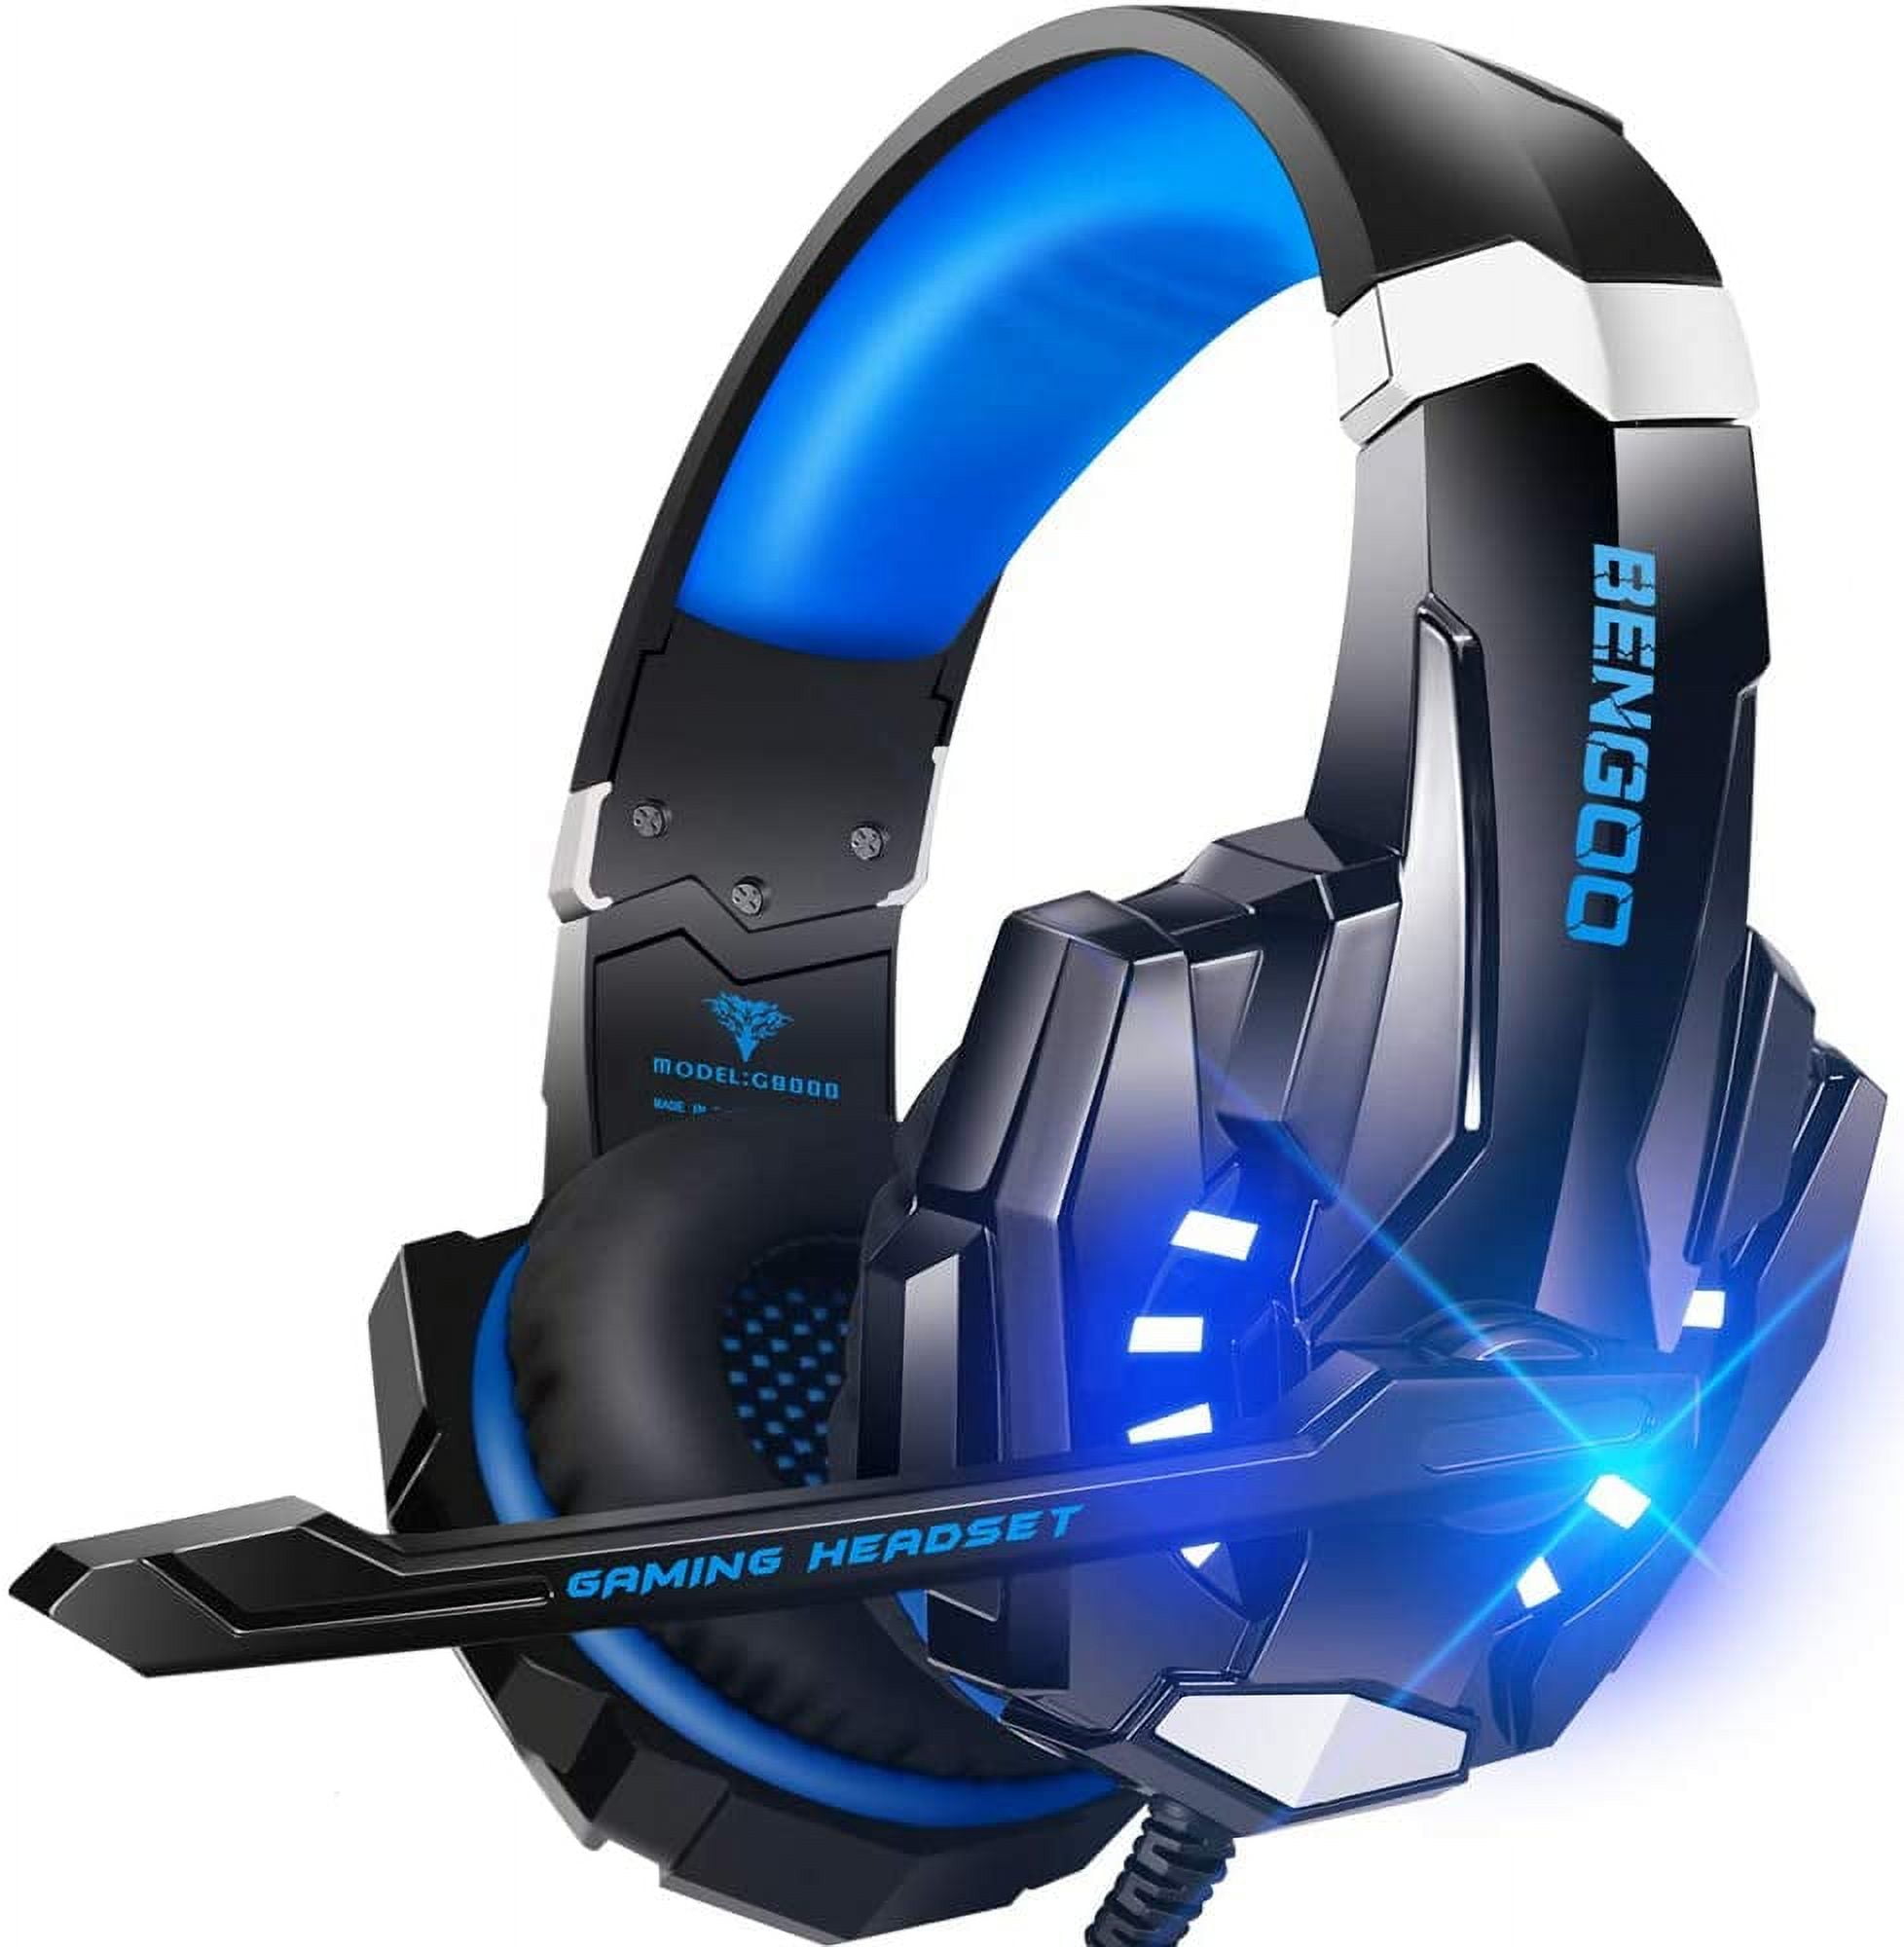  FEIYING Gaming Headset Headphones with Microphone, PS4 PS5  Headset with Noise Cancelling Mic Surround Sound Over Ear Headset for Xbox  One Computer PC Mac Playstation : Video Games